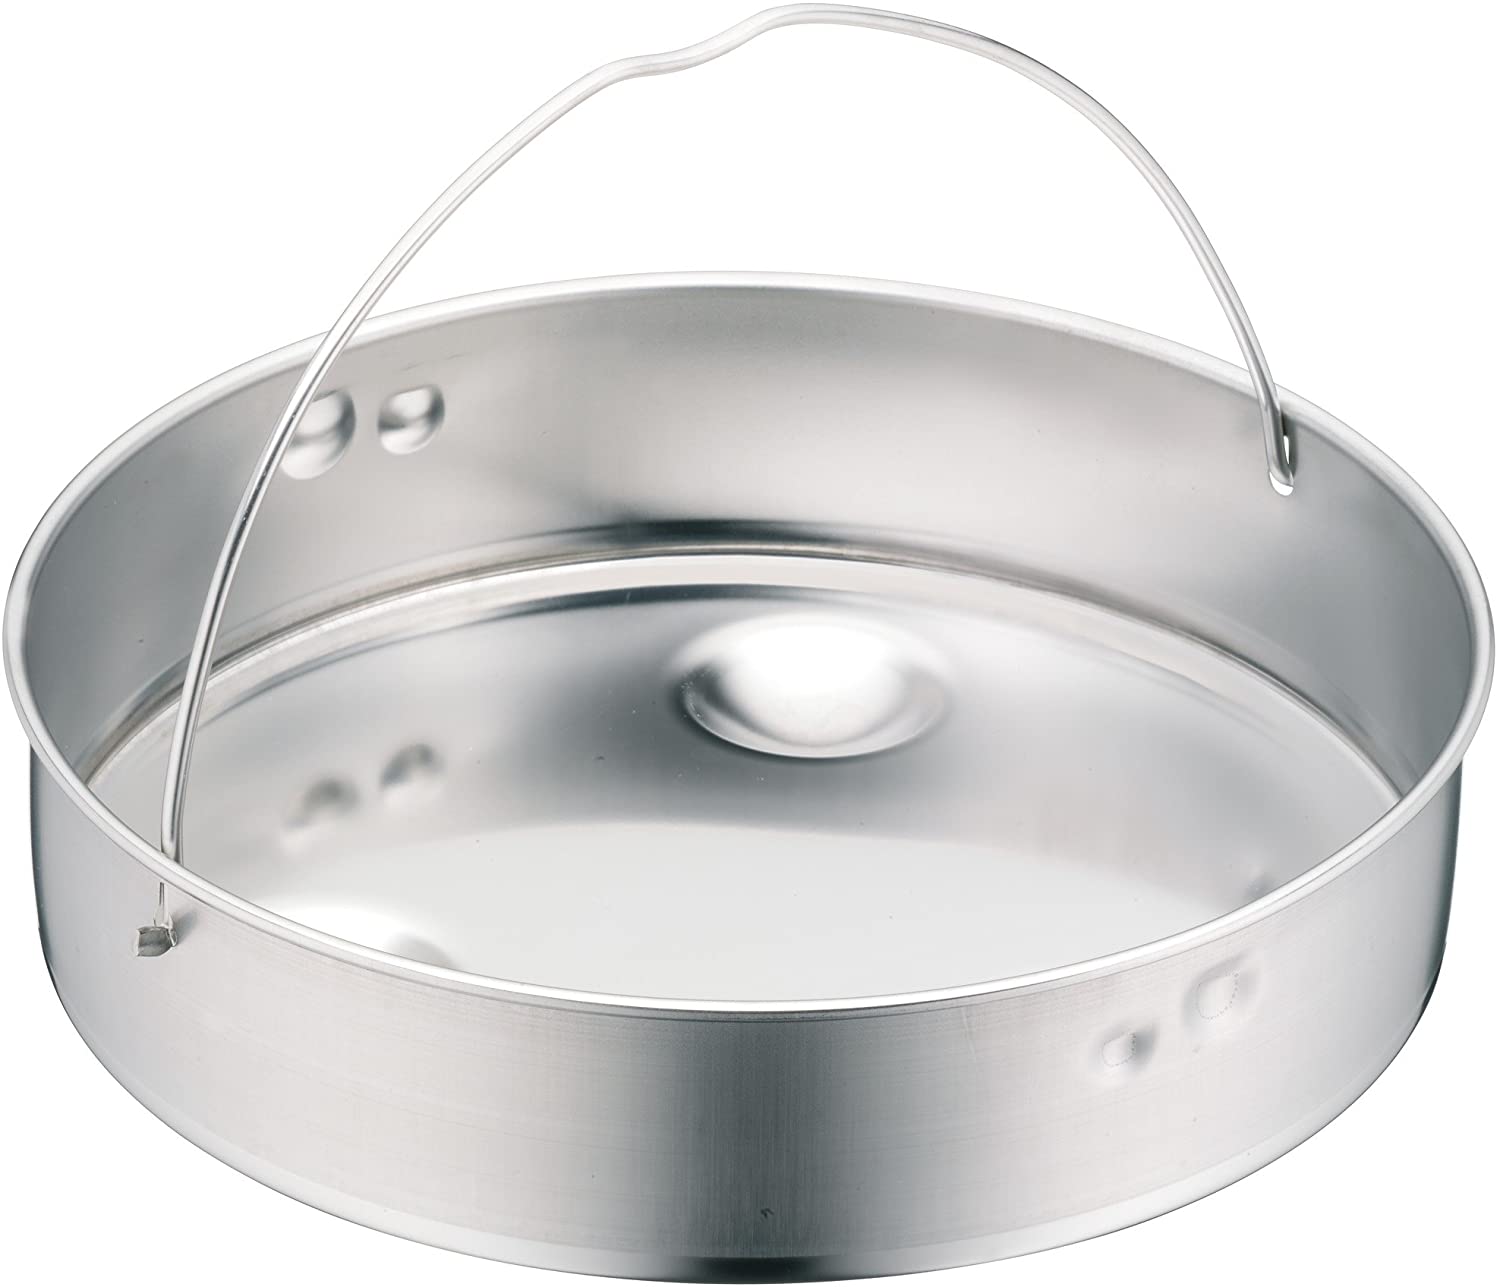 WMF Unperforated Insert for Pressure Cookers, 22 cm